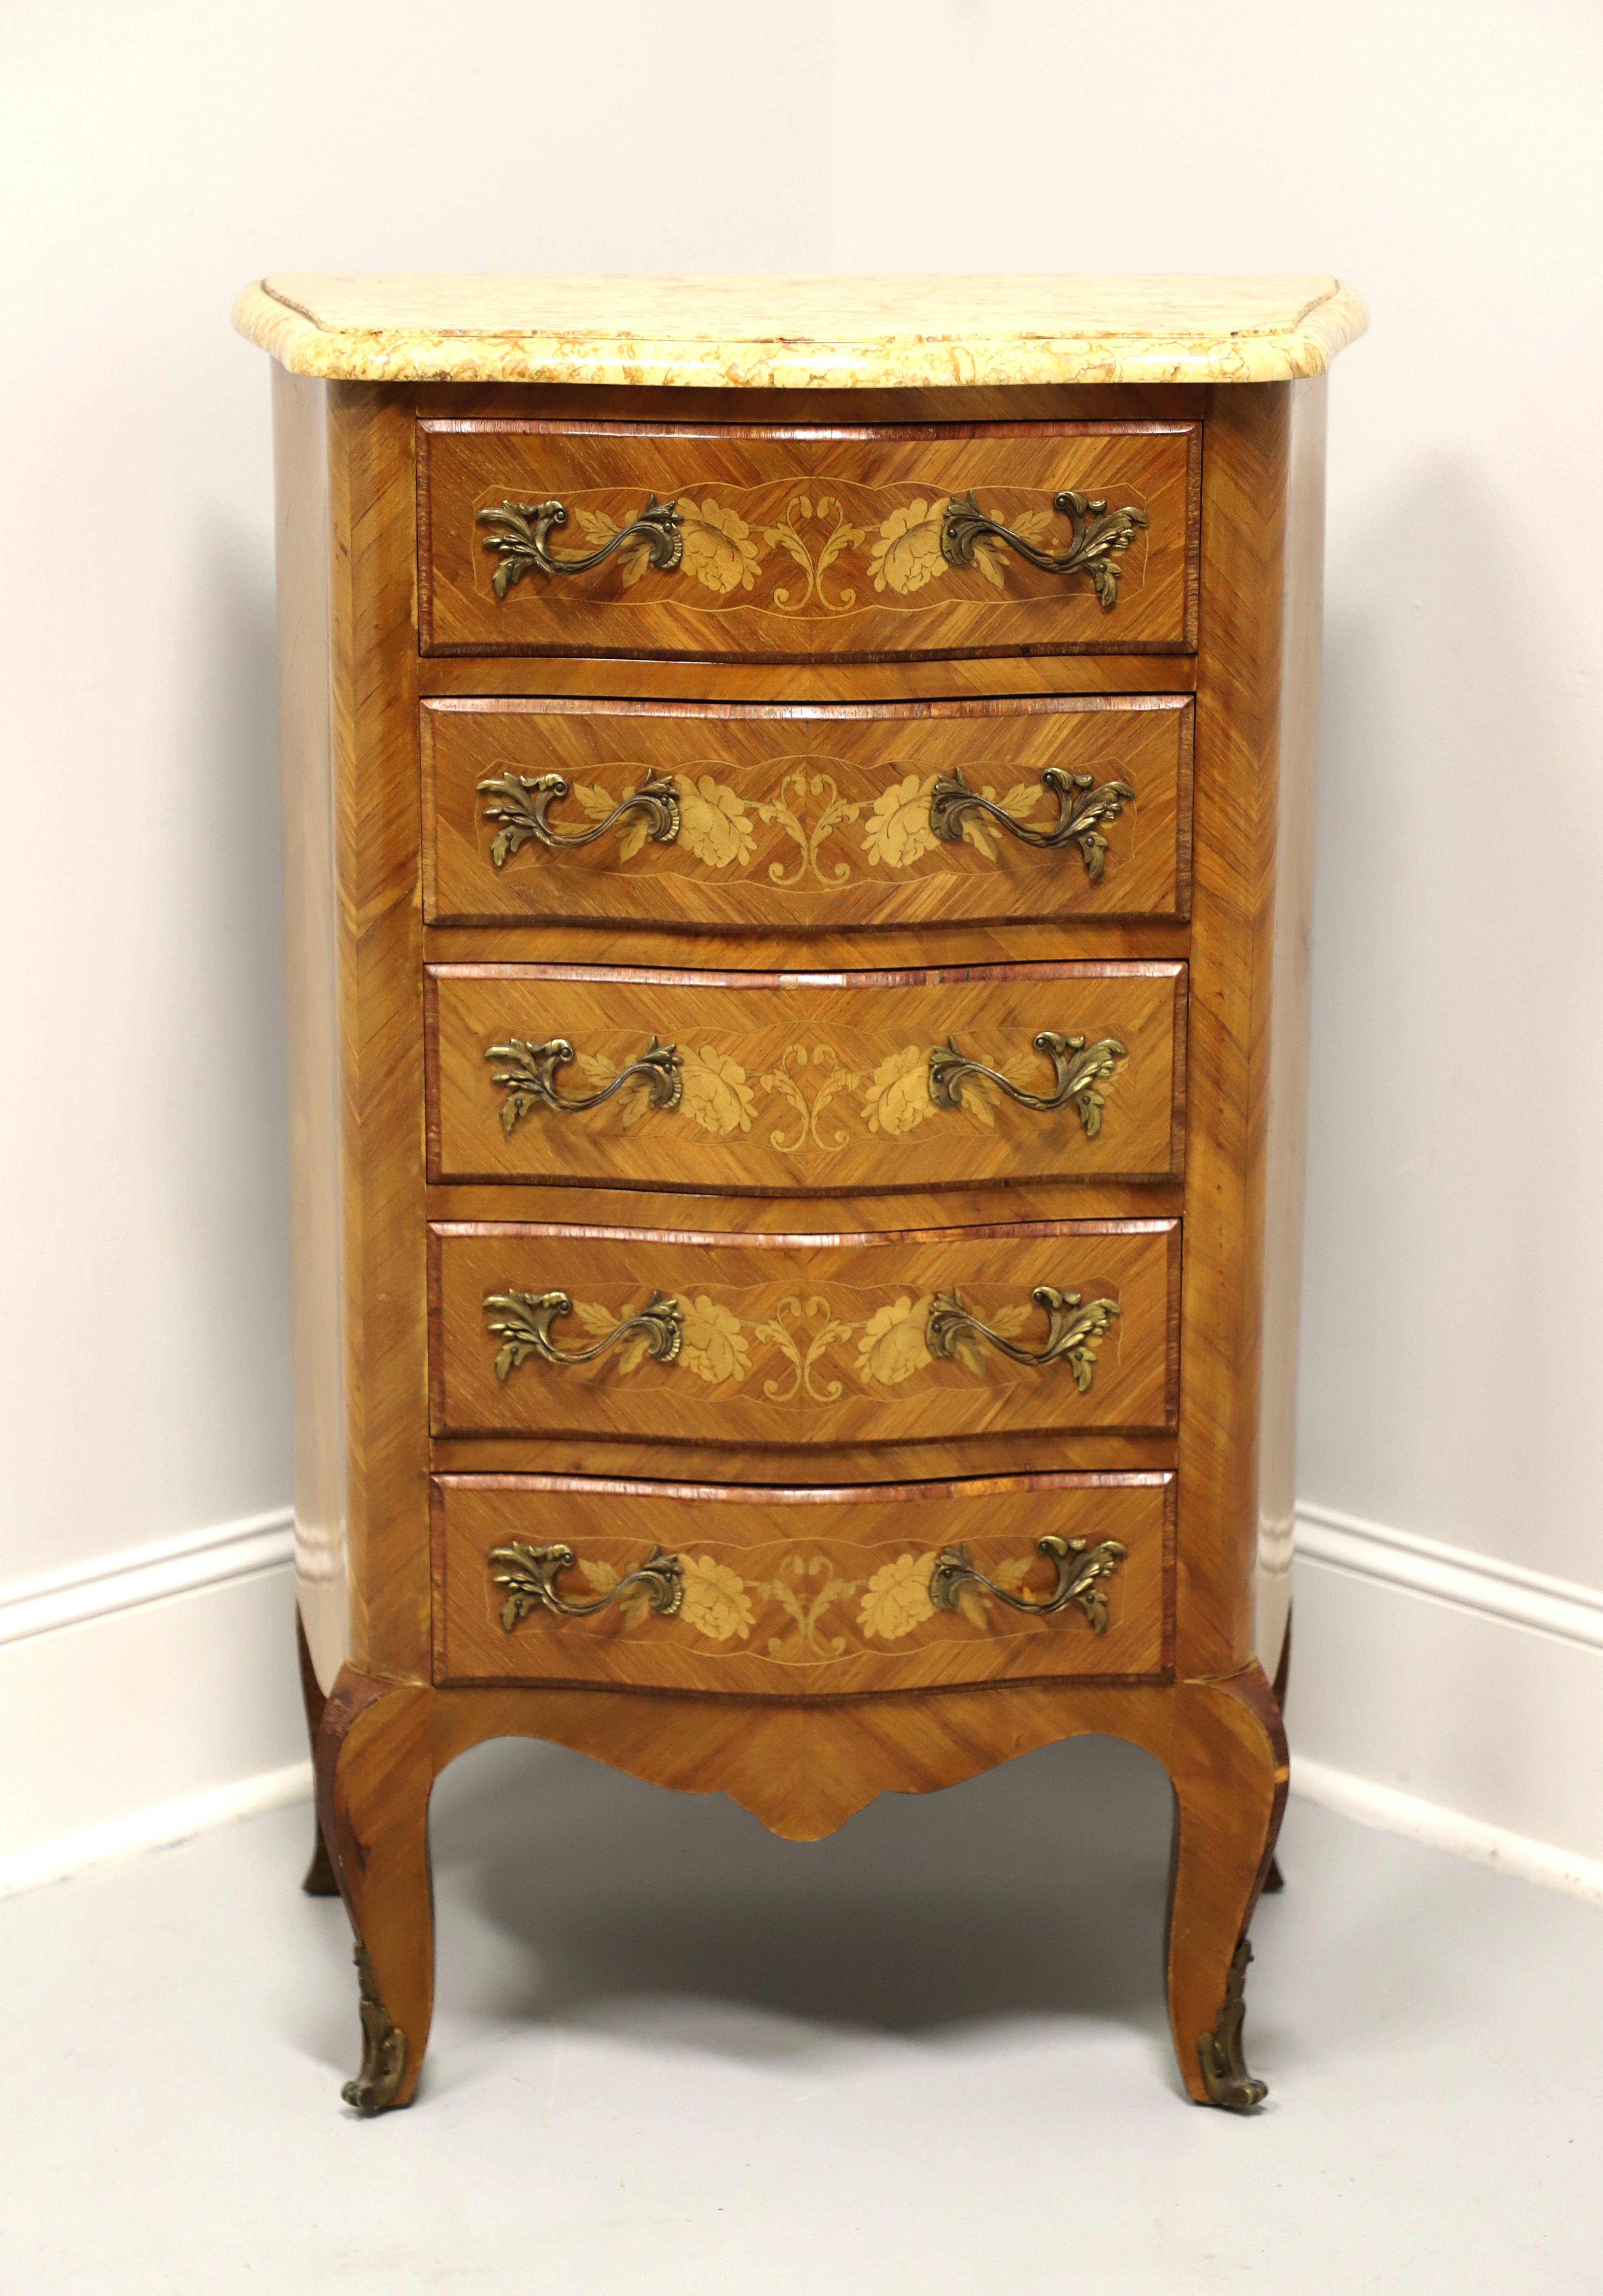 An antique semainier chest in the French Louis XV style, unbranded. Constructed of kingwood with a bowed front, inlaid floral designs on the drawer fronts, brass drawer pulls, cream color marble top, and brass ormolu on the feet. Features five